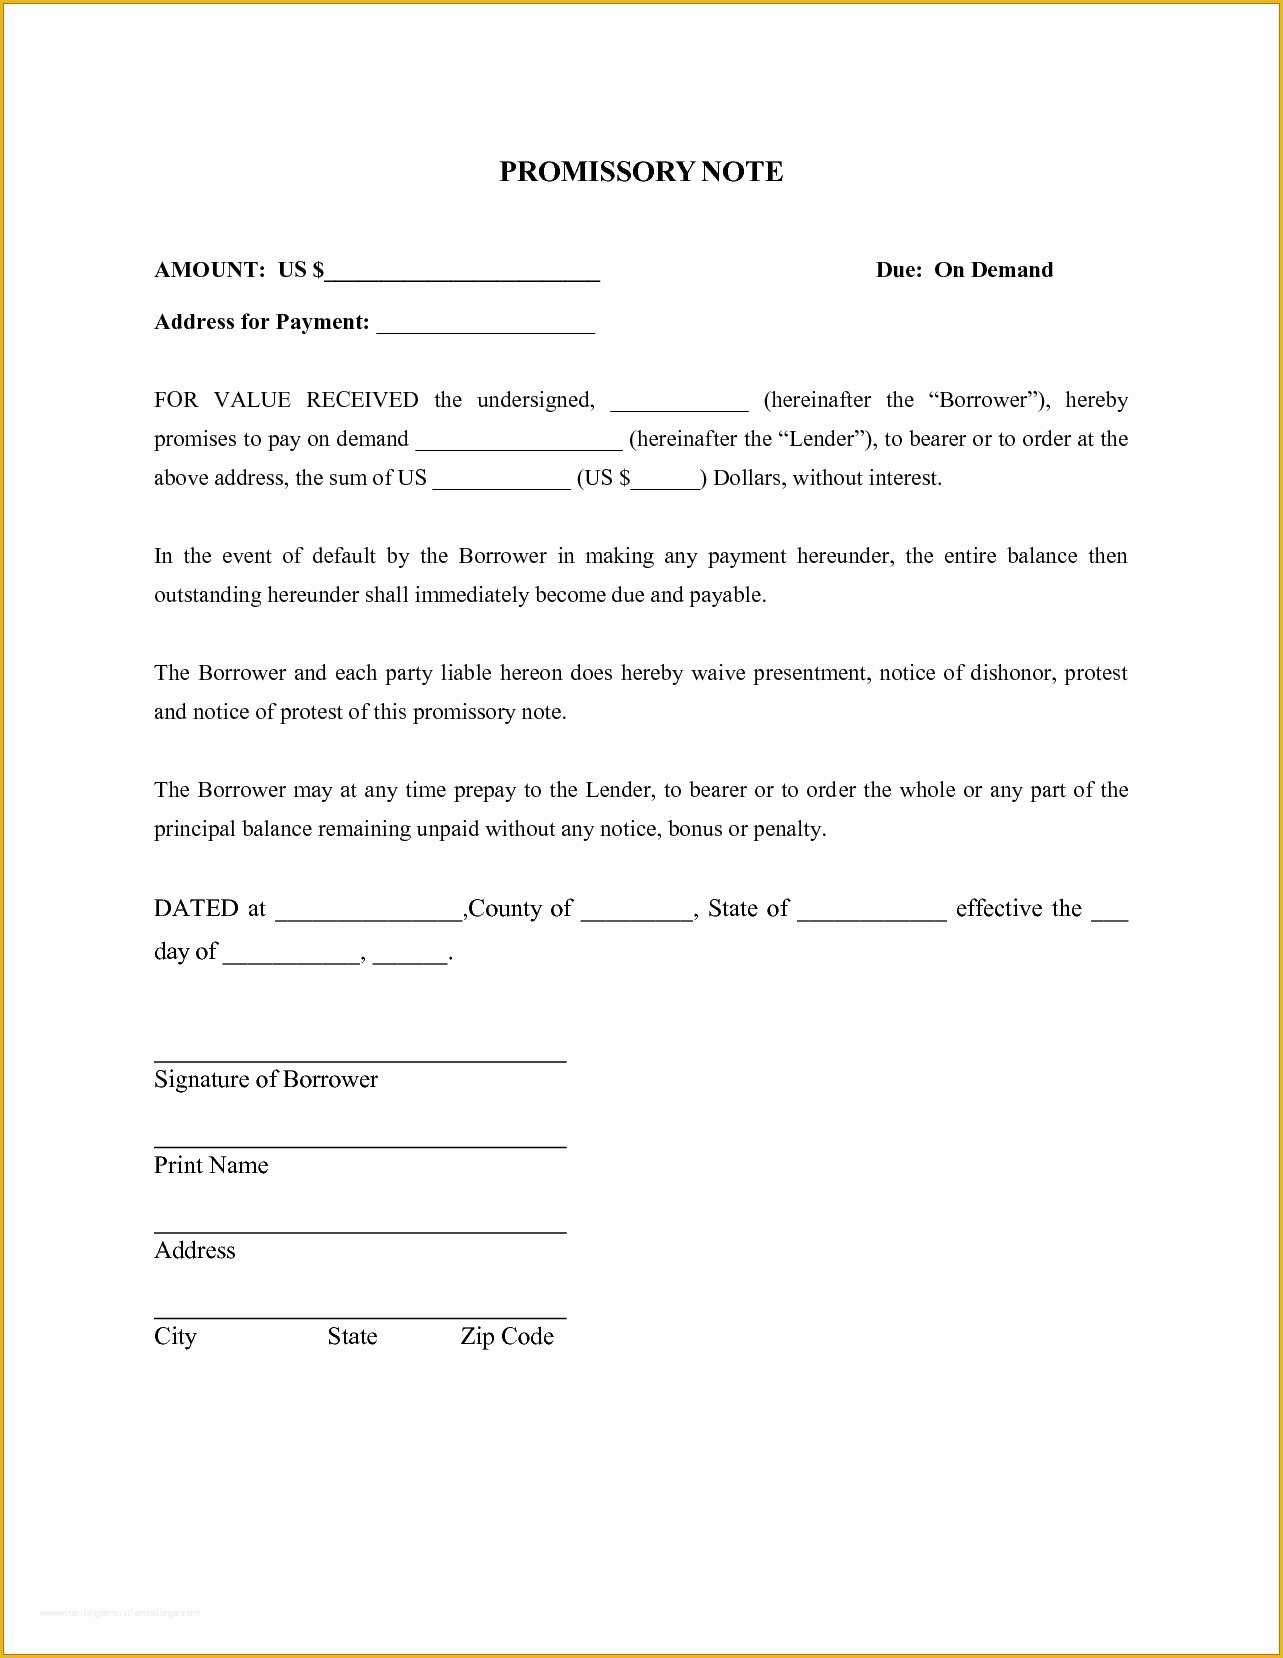 free-promissory-note-template-of-simple-promissory-note-forms-idealstalist